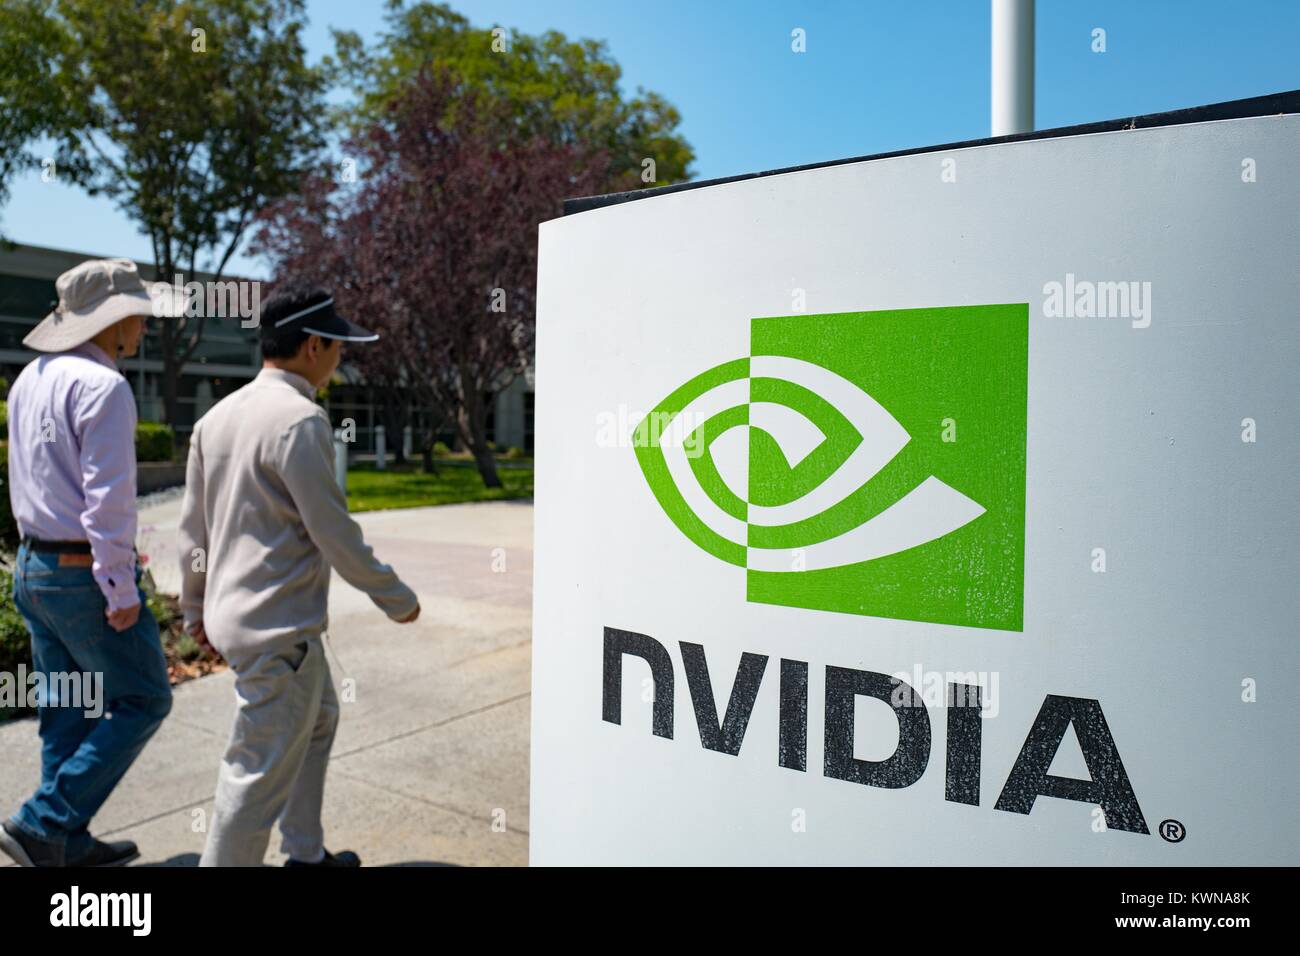 Two men walk together past signage with logo at the Silicon Valley headquarters of computer graphics hardware company Nvidia, Santa Clara, California, August 17, 2017. Stock Photo